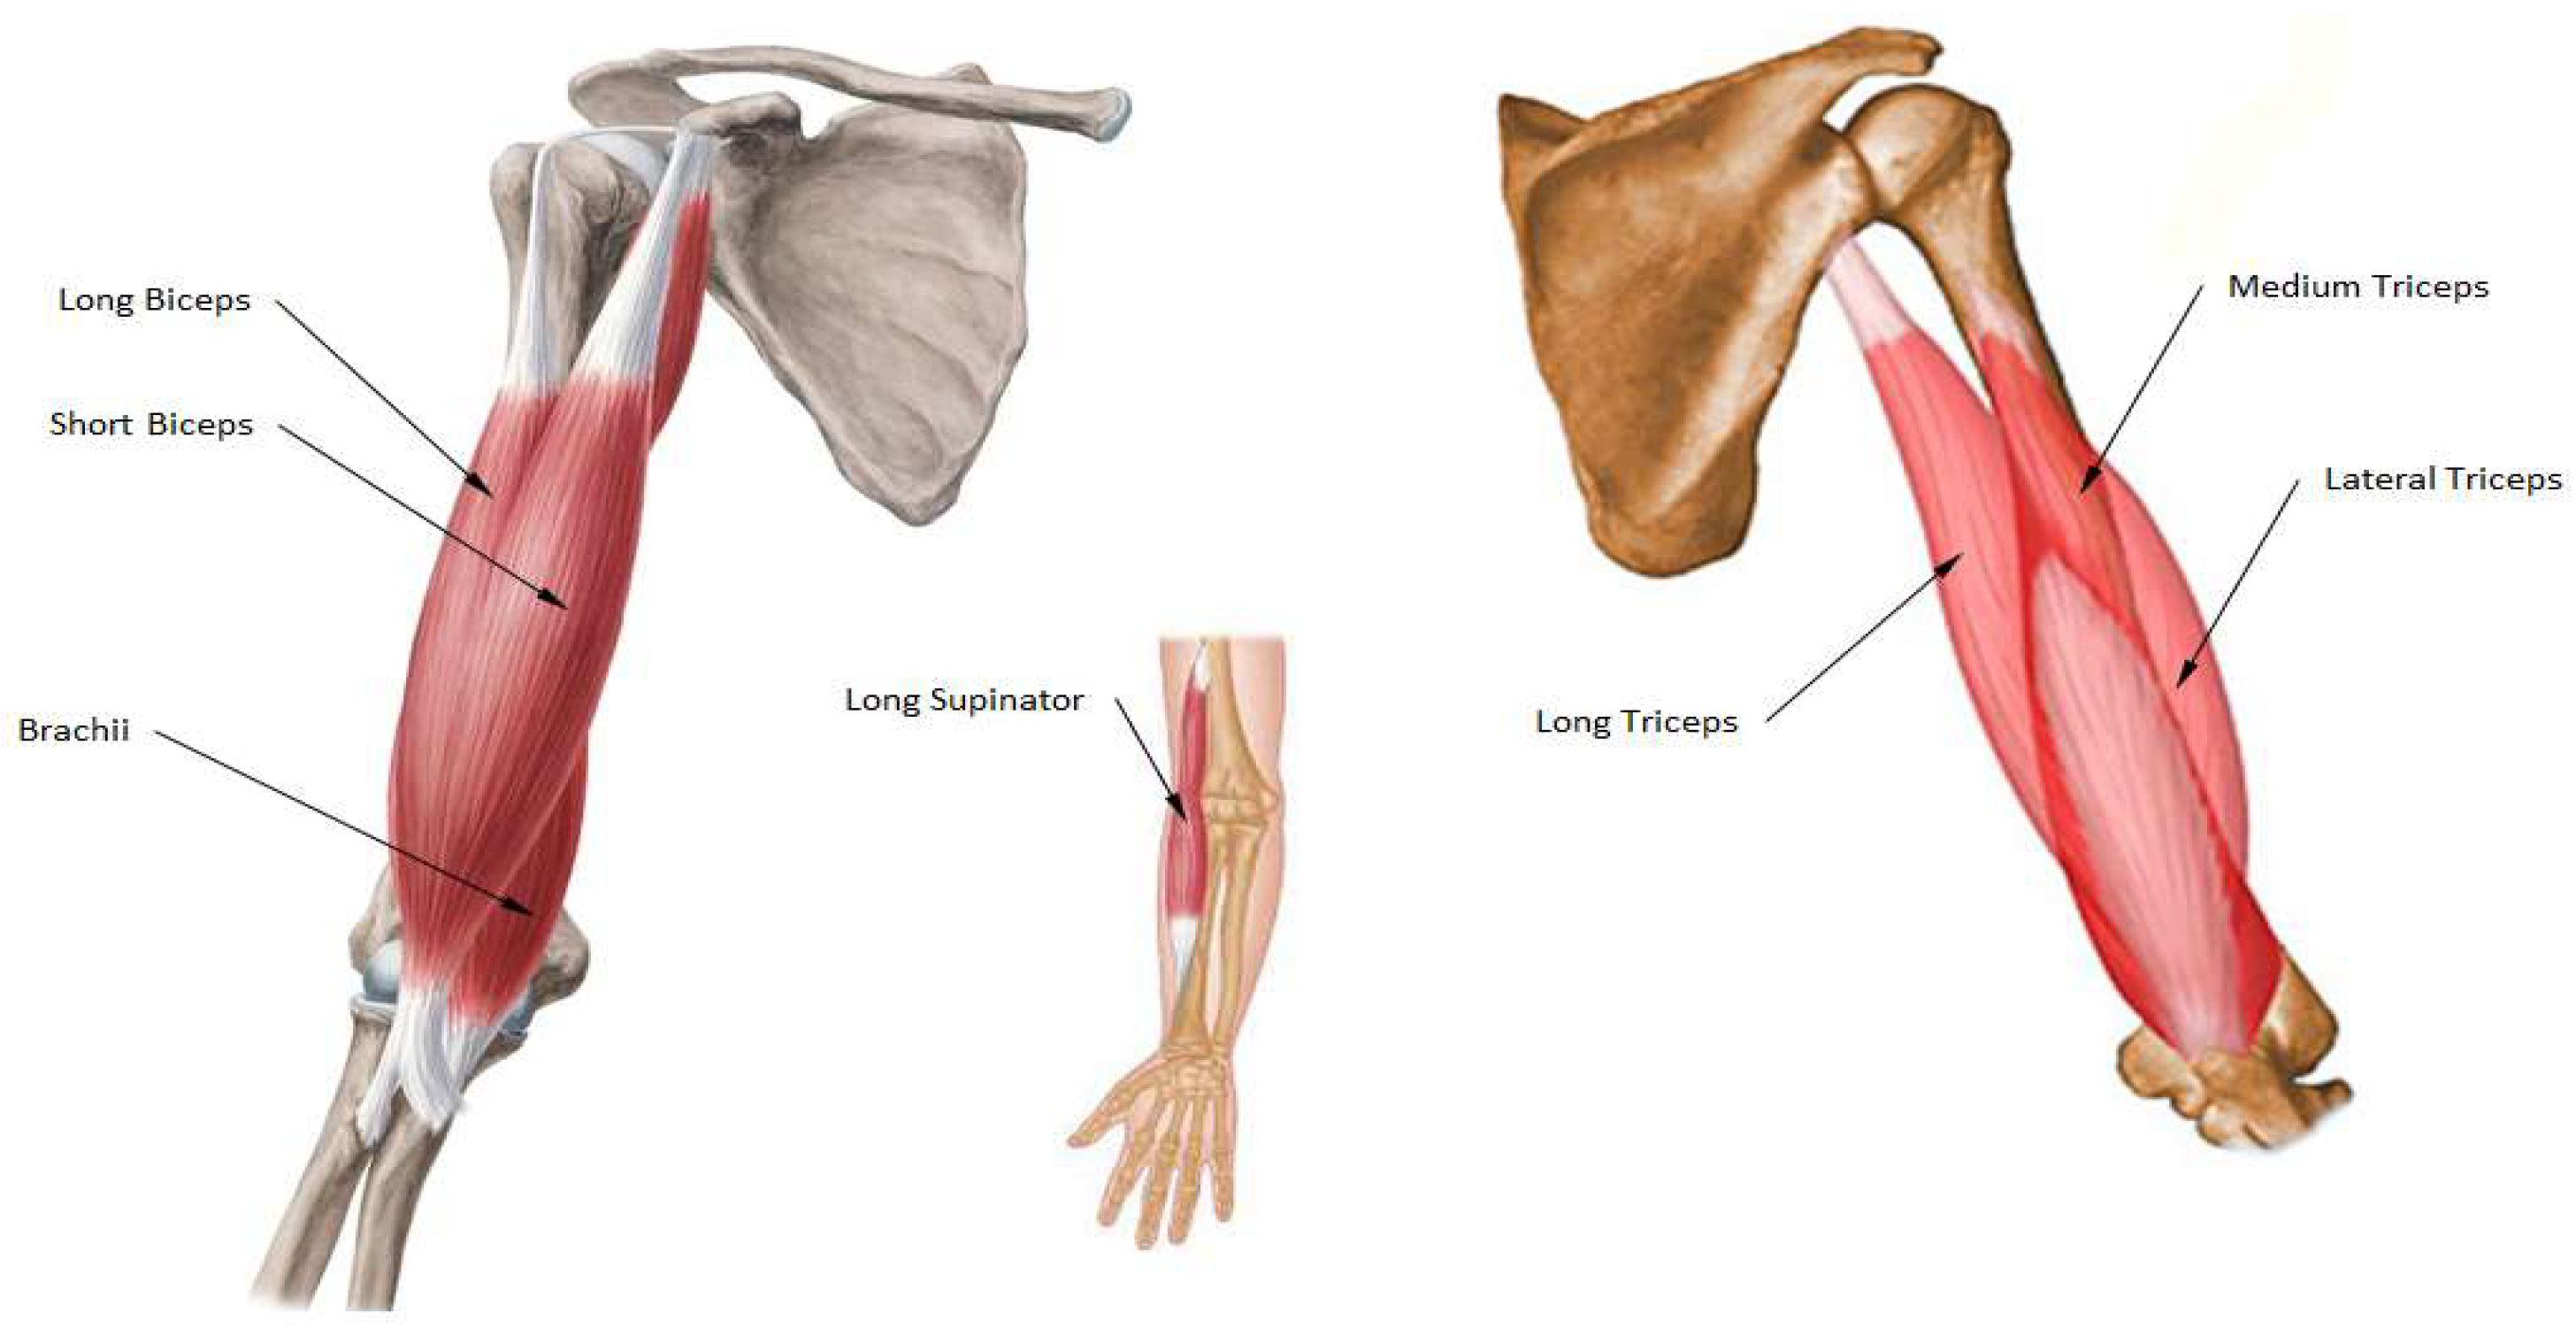 Anatomy of the biceps and triceps brachii. (A) The shaded region